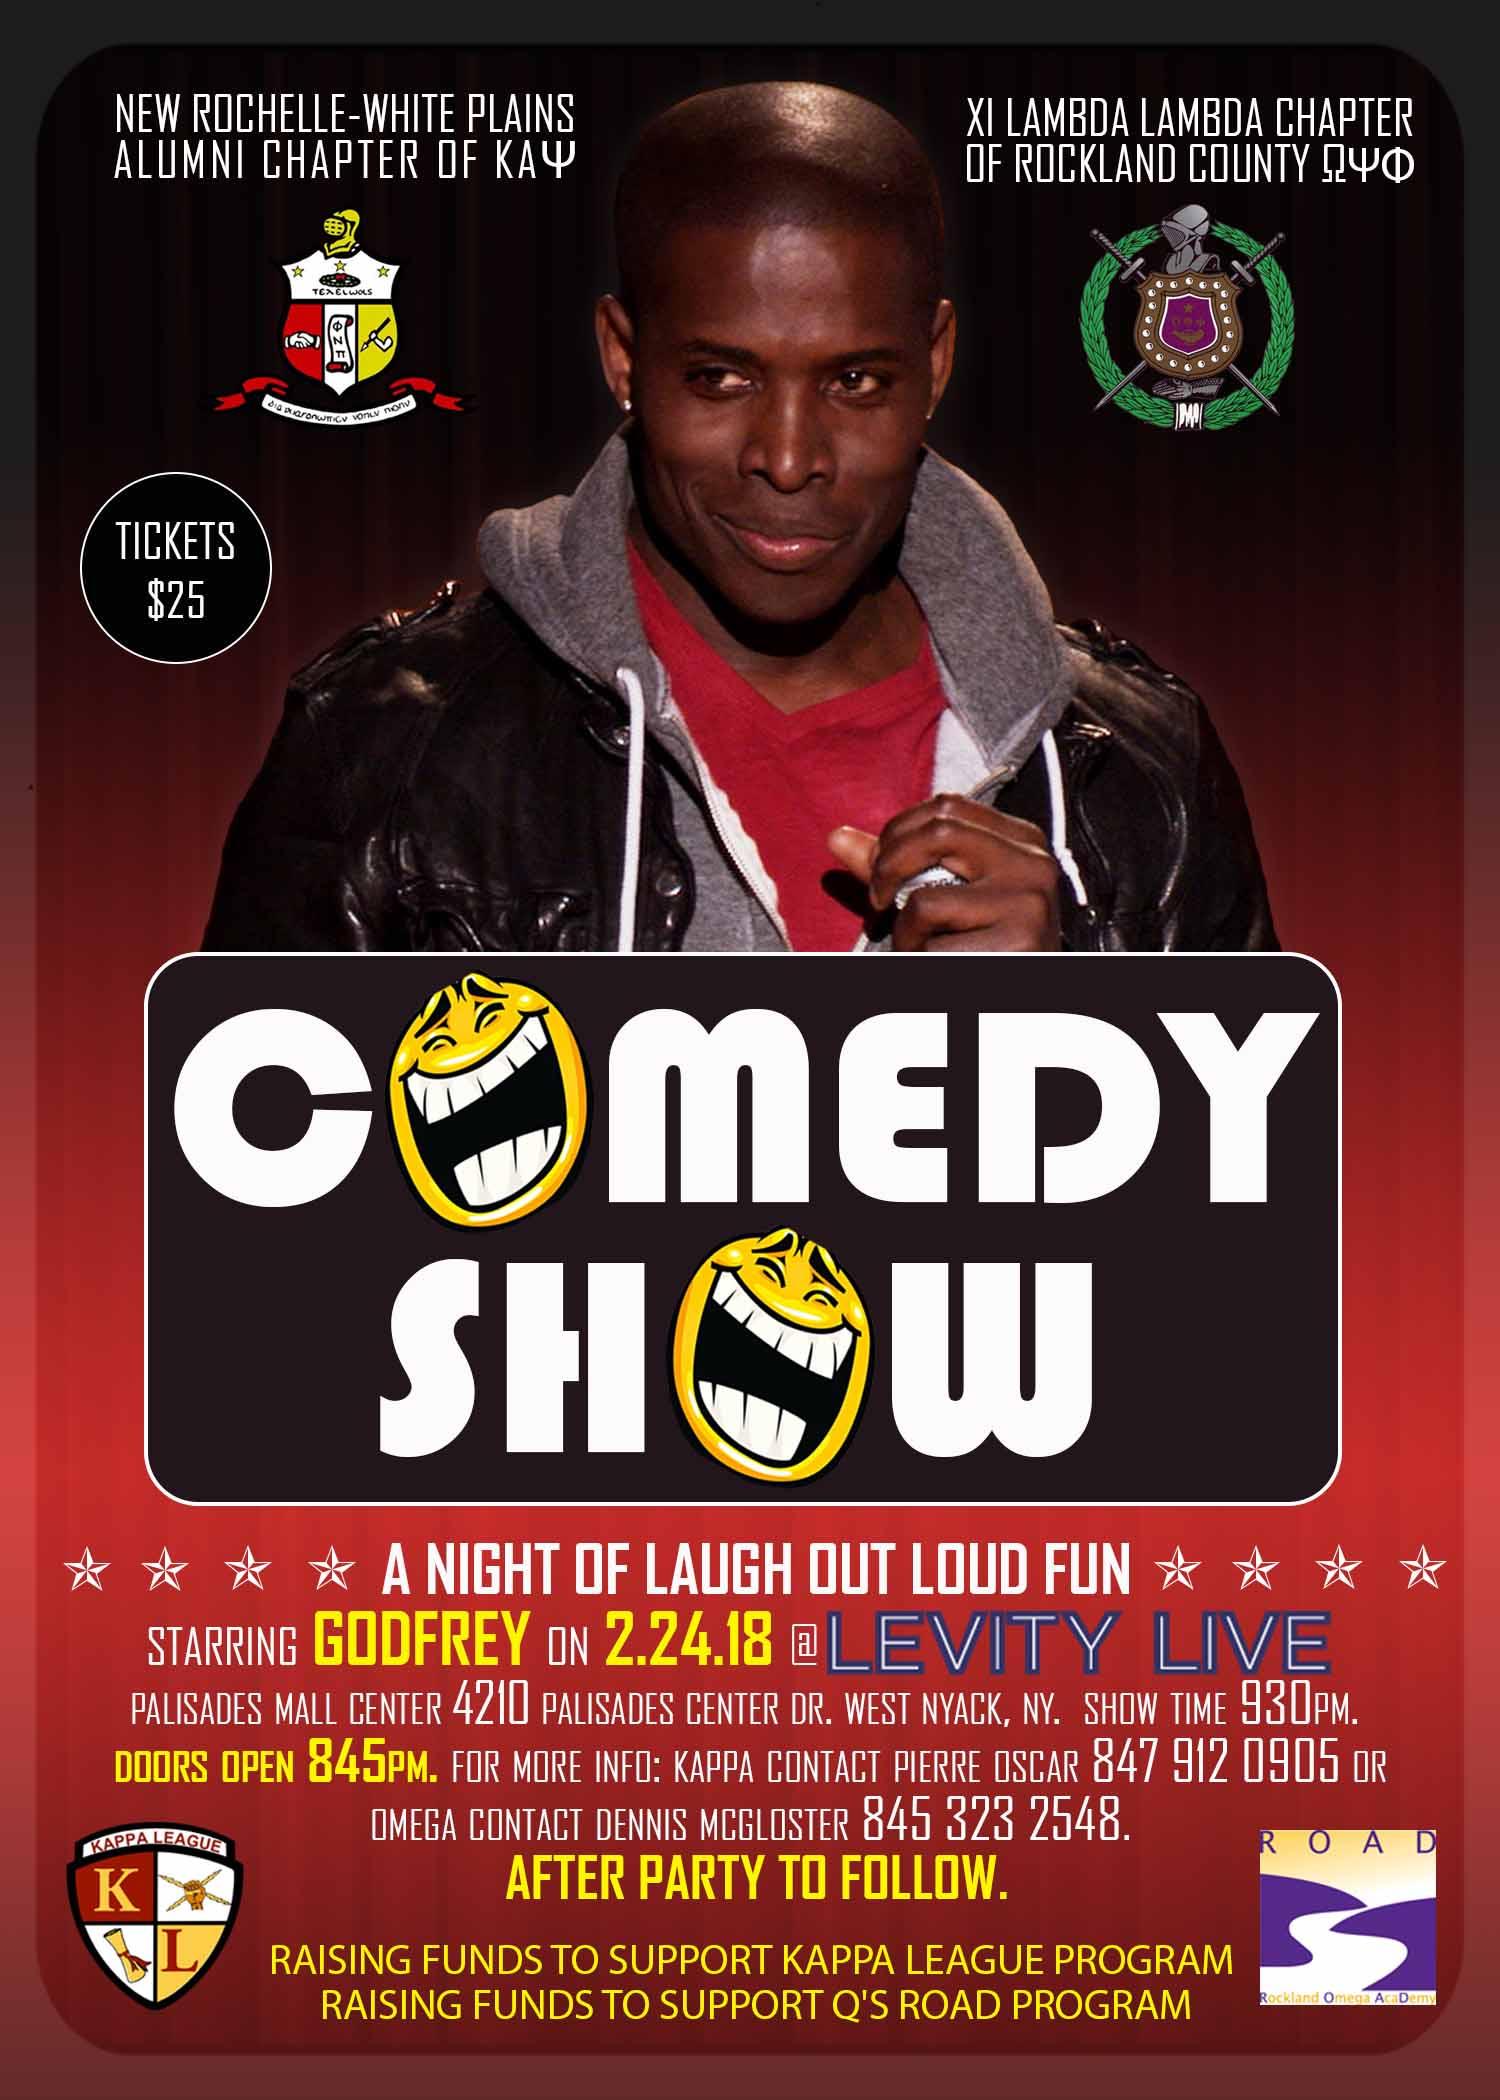 NRWP ALUMNI & Rockland Ques PRESENTS- Laugh Out Loud LOL COMEDY NIGHT with Godfrey” LIVE